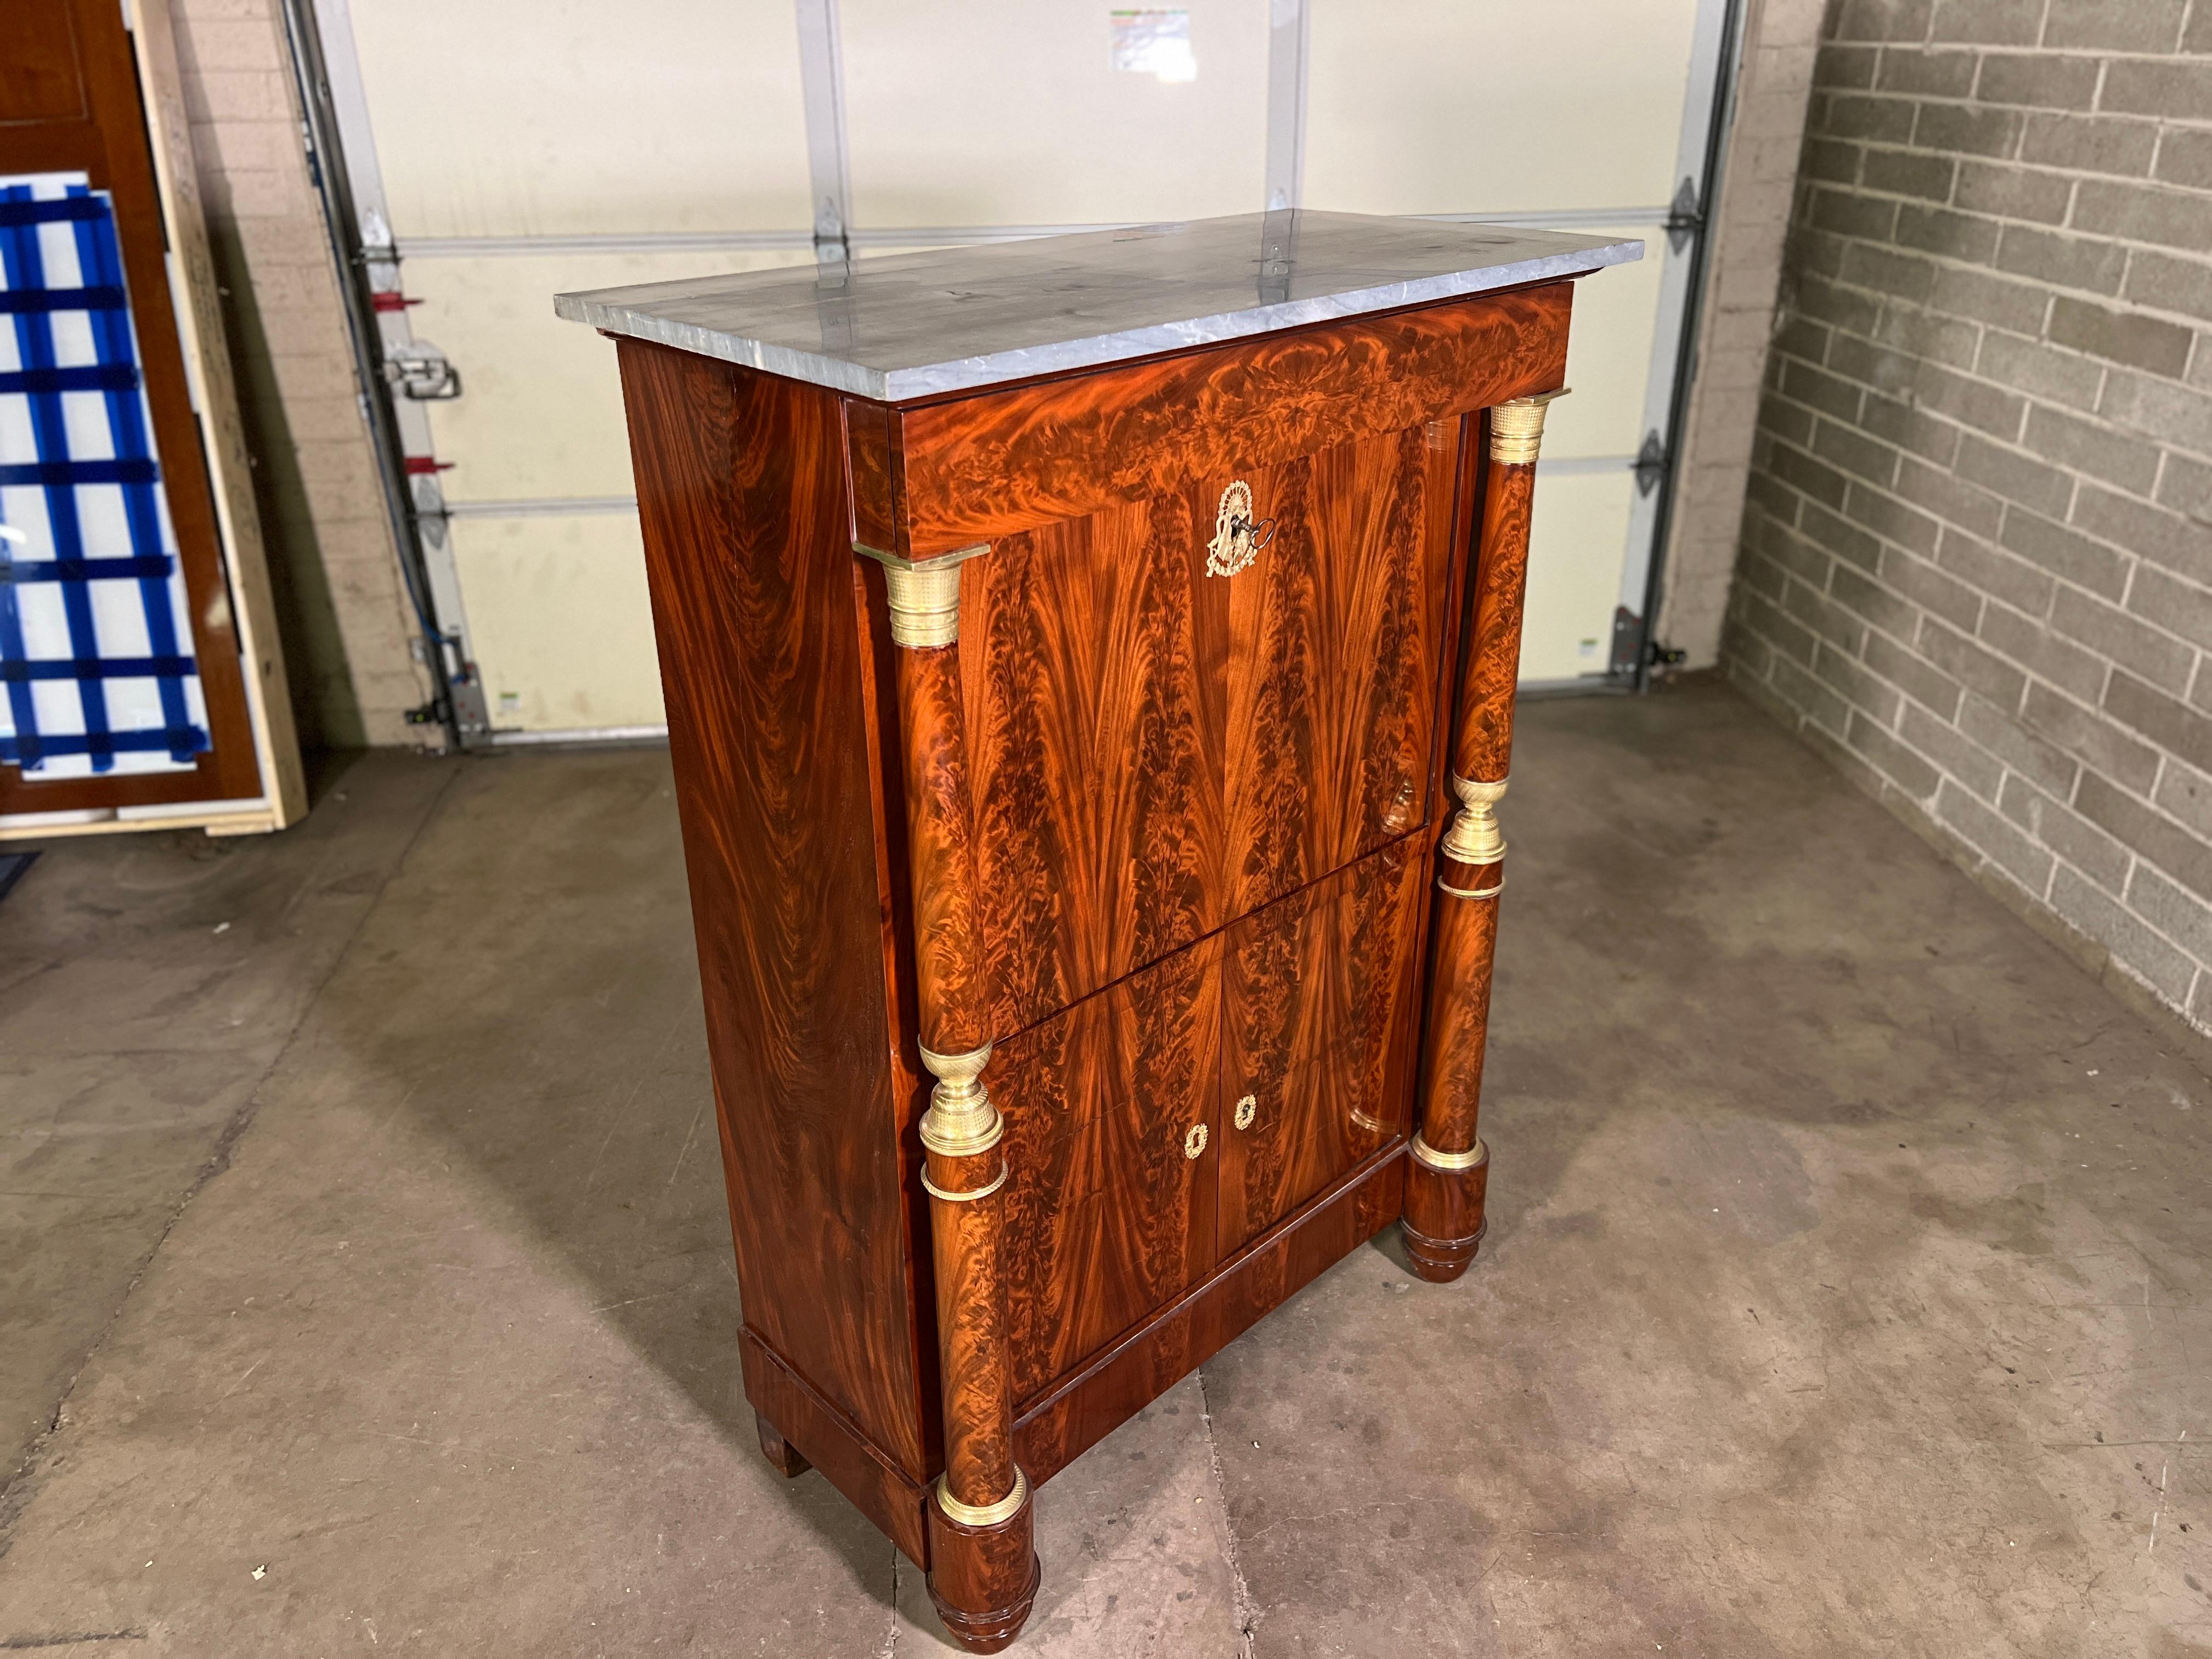 Circa 1810. French Empire Mahogany Secretary With Ormolu Fittings & Trim In Good Condition For Sale In Scottsdale, AZ